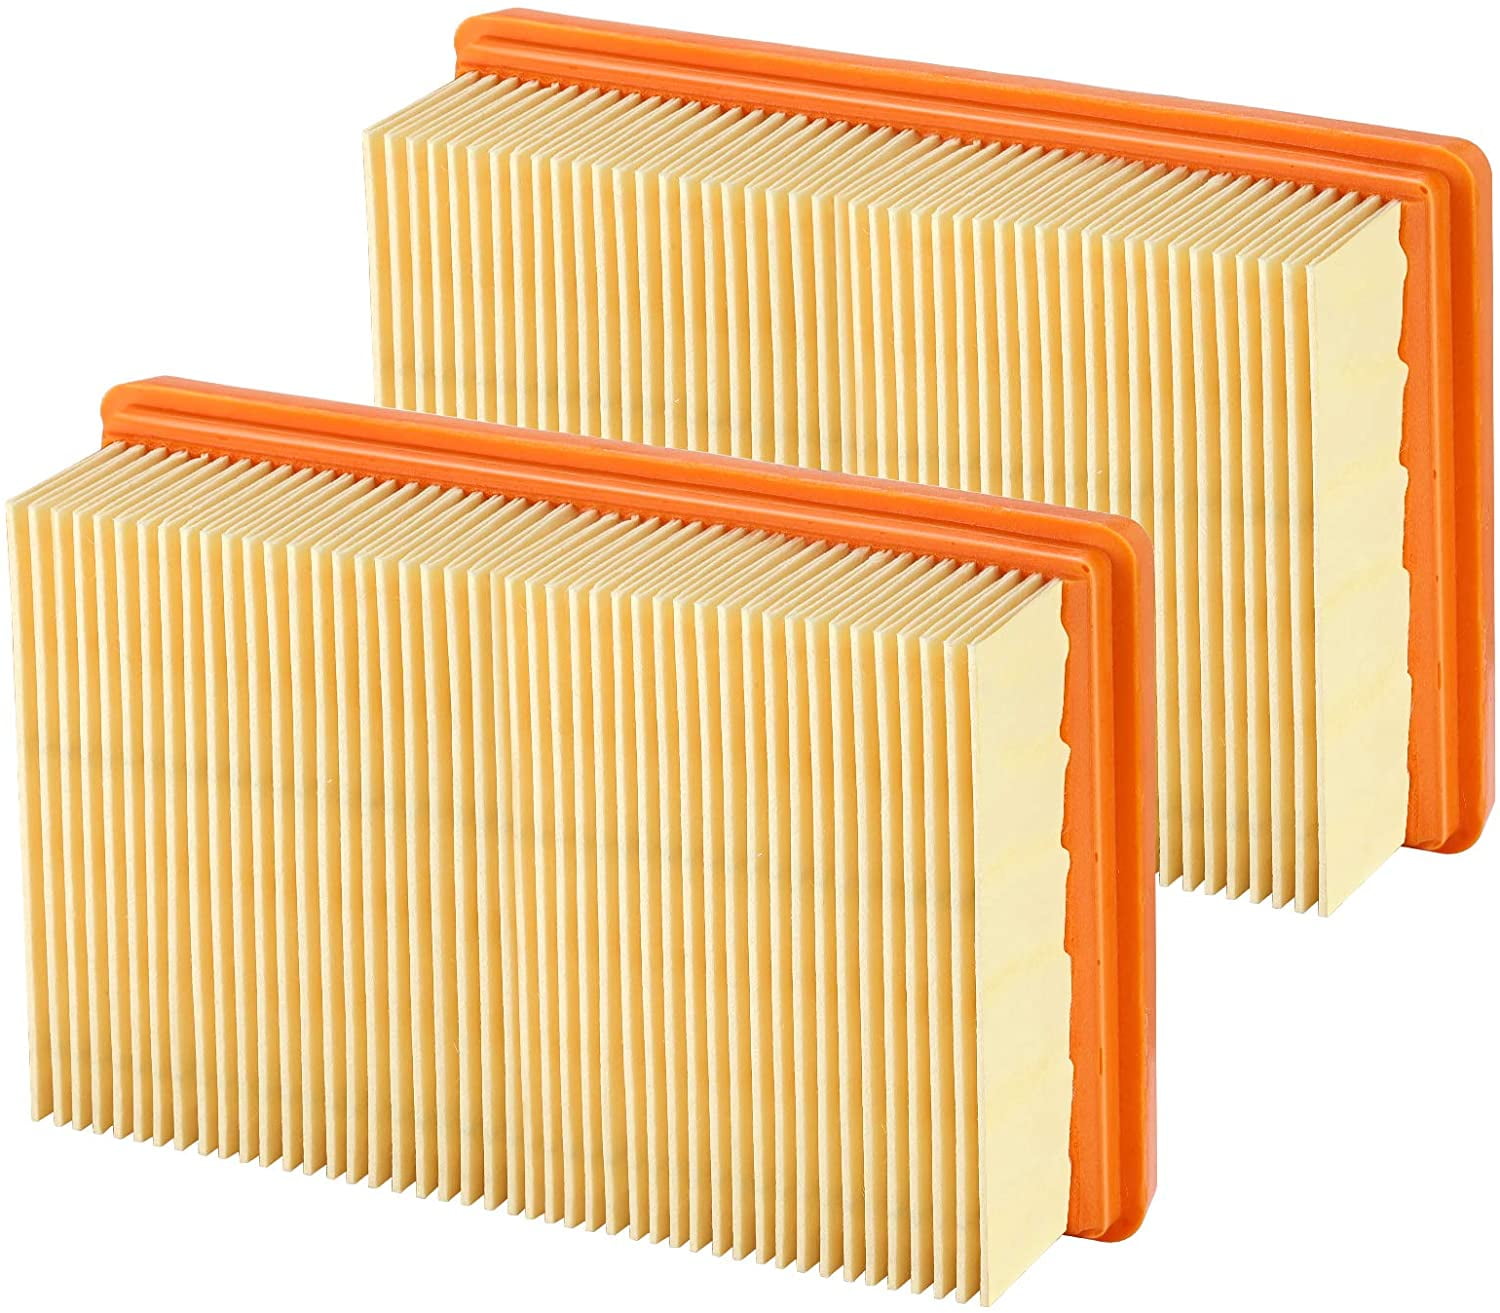 GENUINE KARCHER FLAT PLEATED FILTER FOR WD4 WD 4 2.863-005.0 